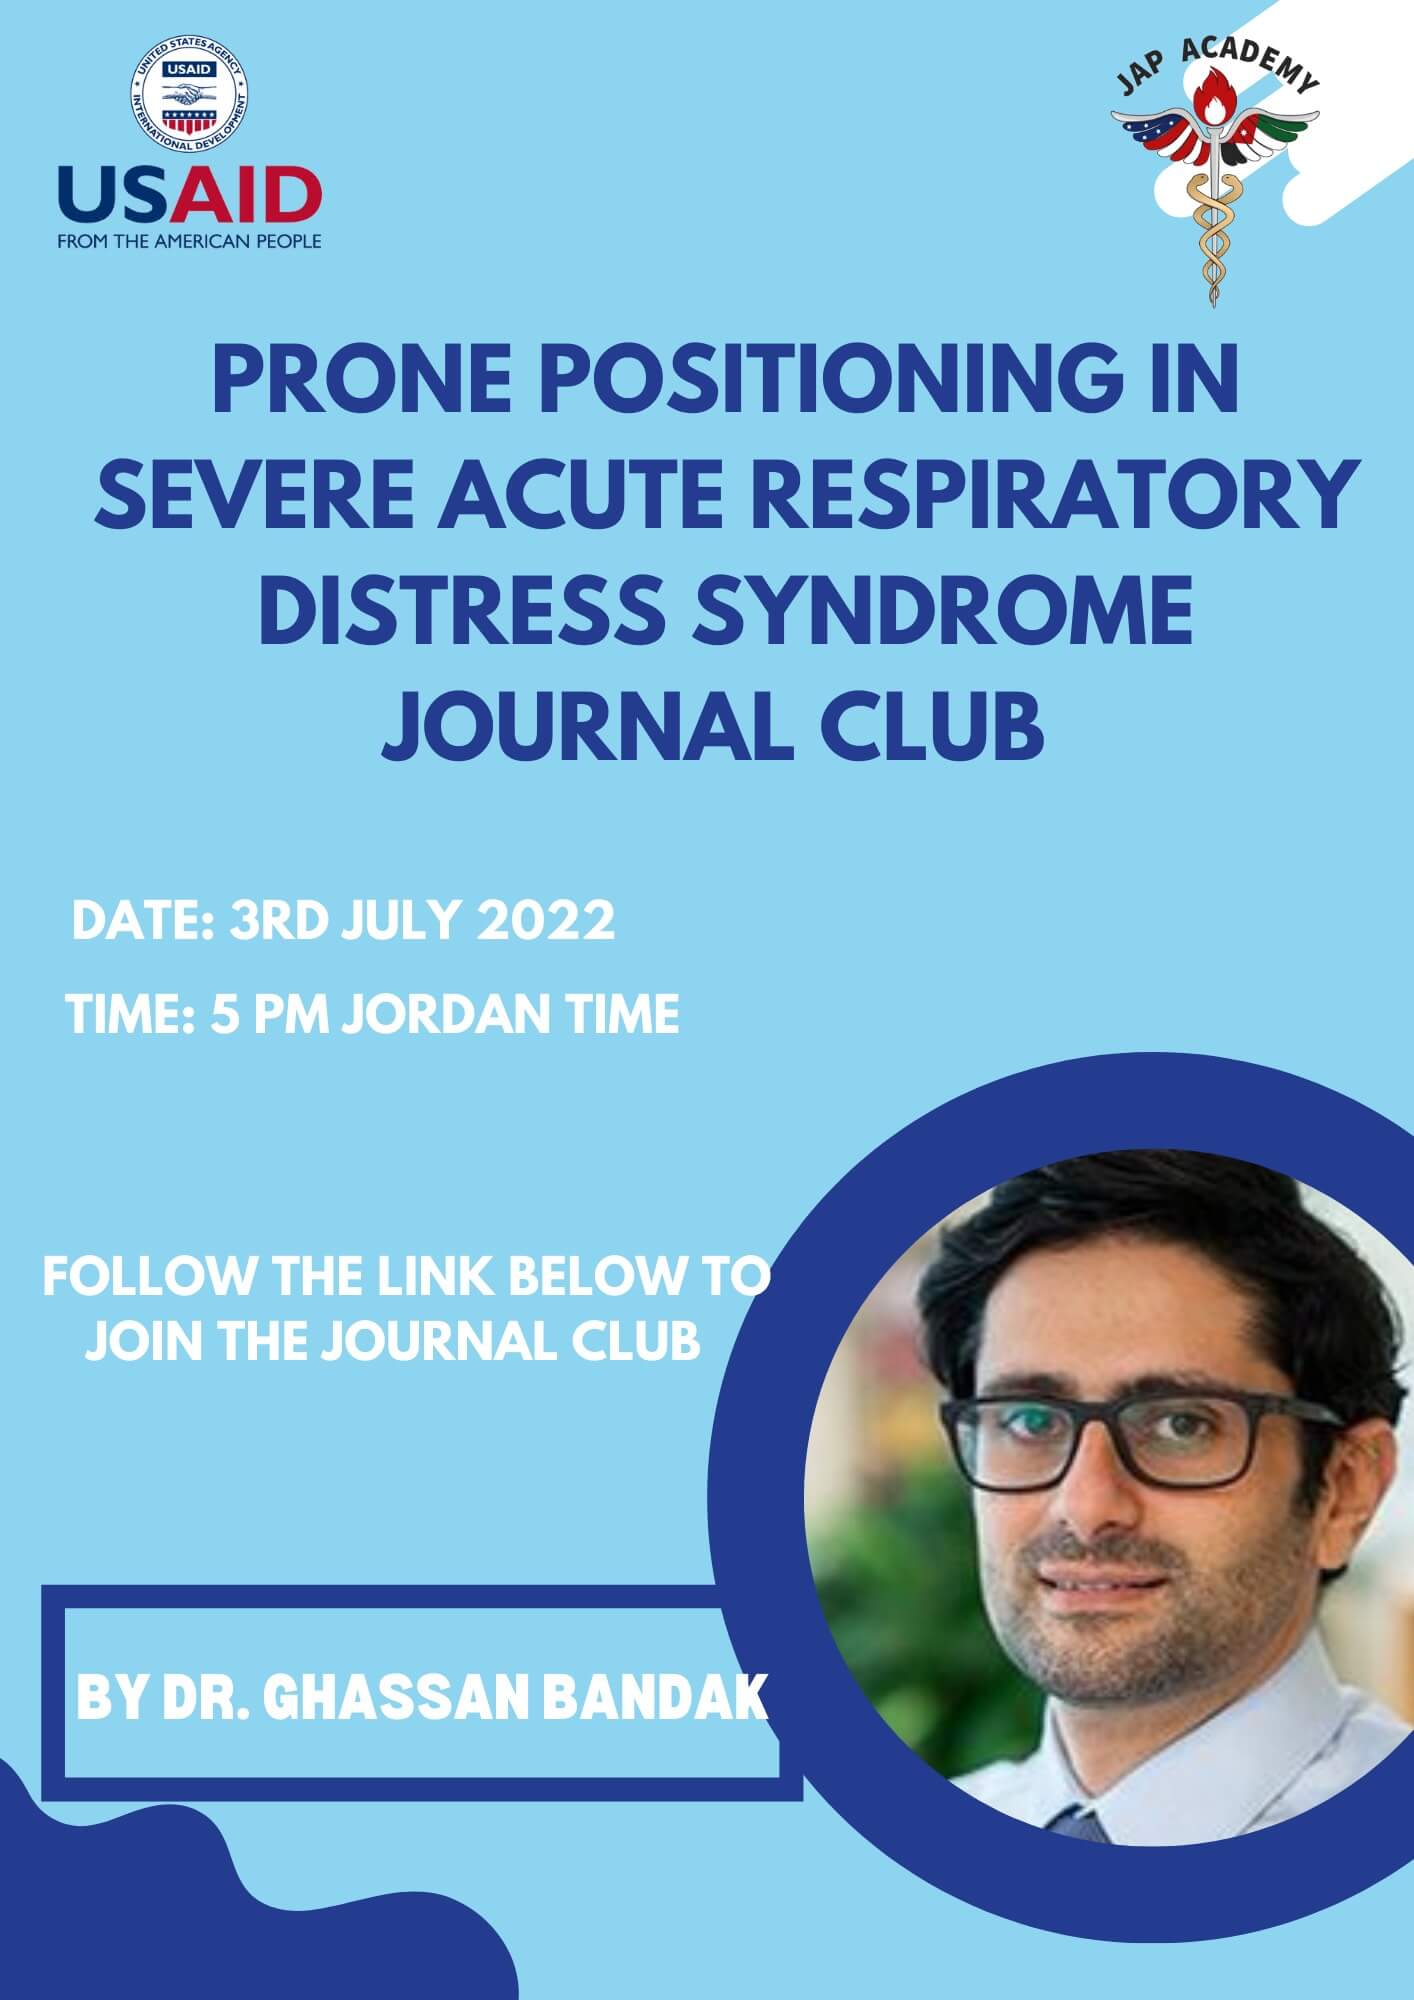 Prone Positioning in Severe Acute Respiratory Distress Syndrome Journal Club